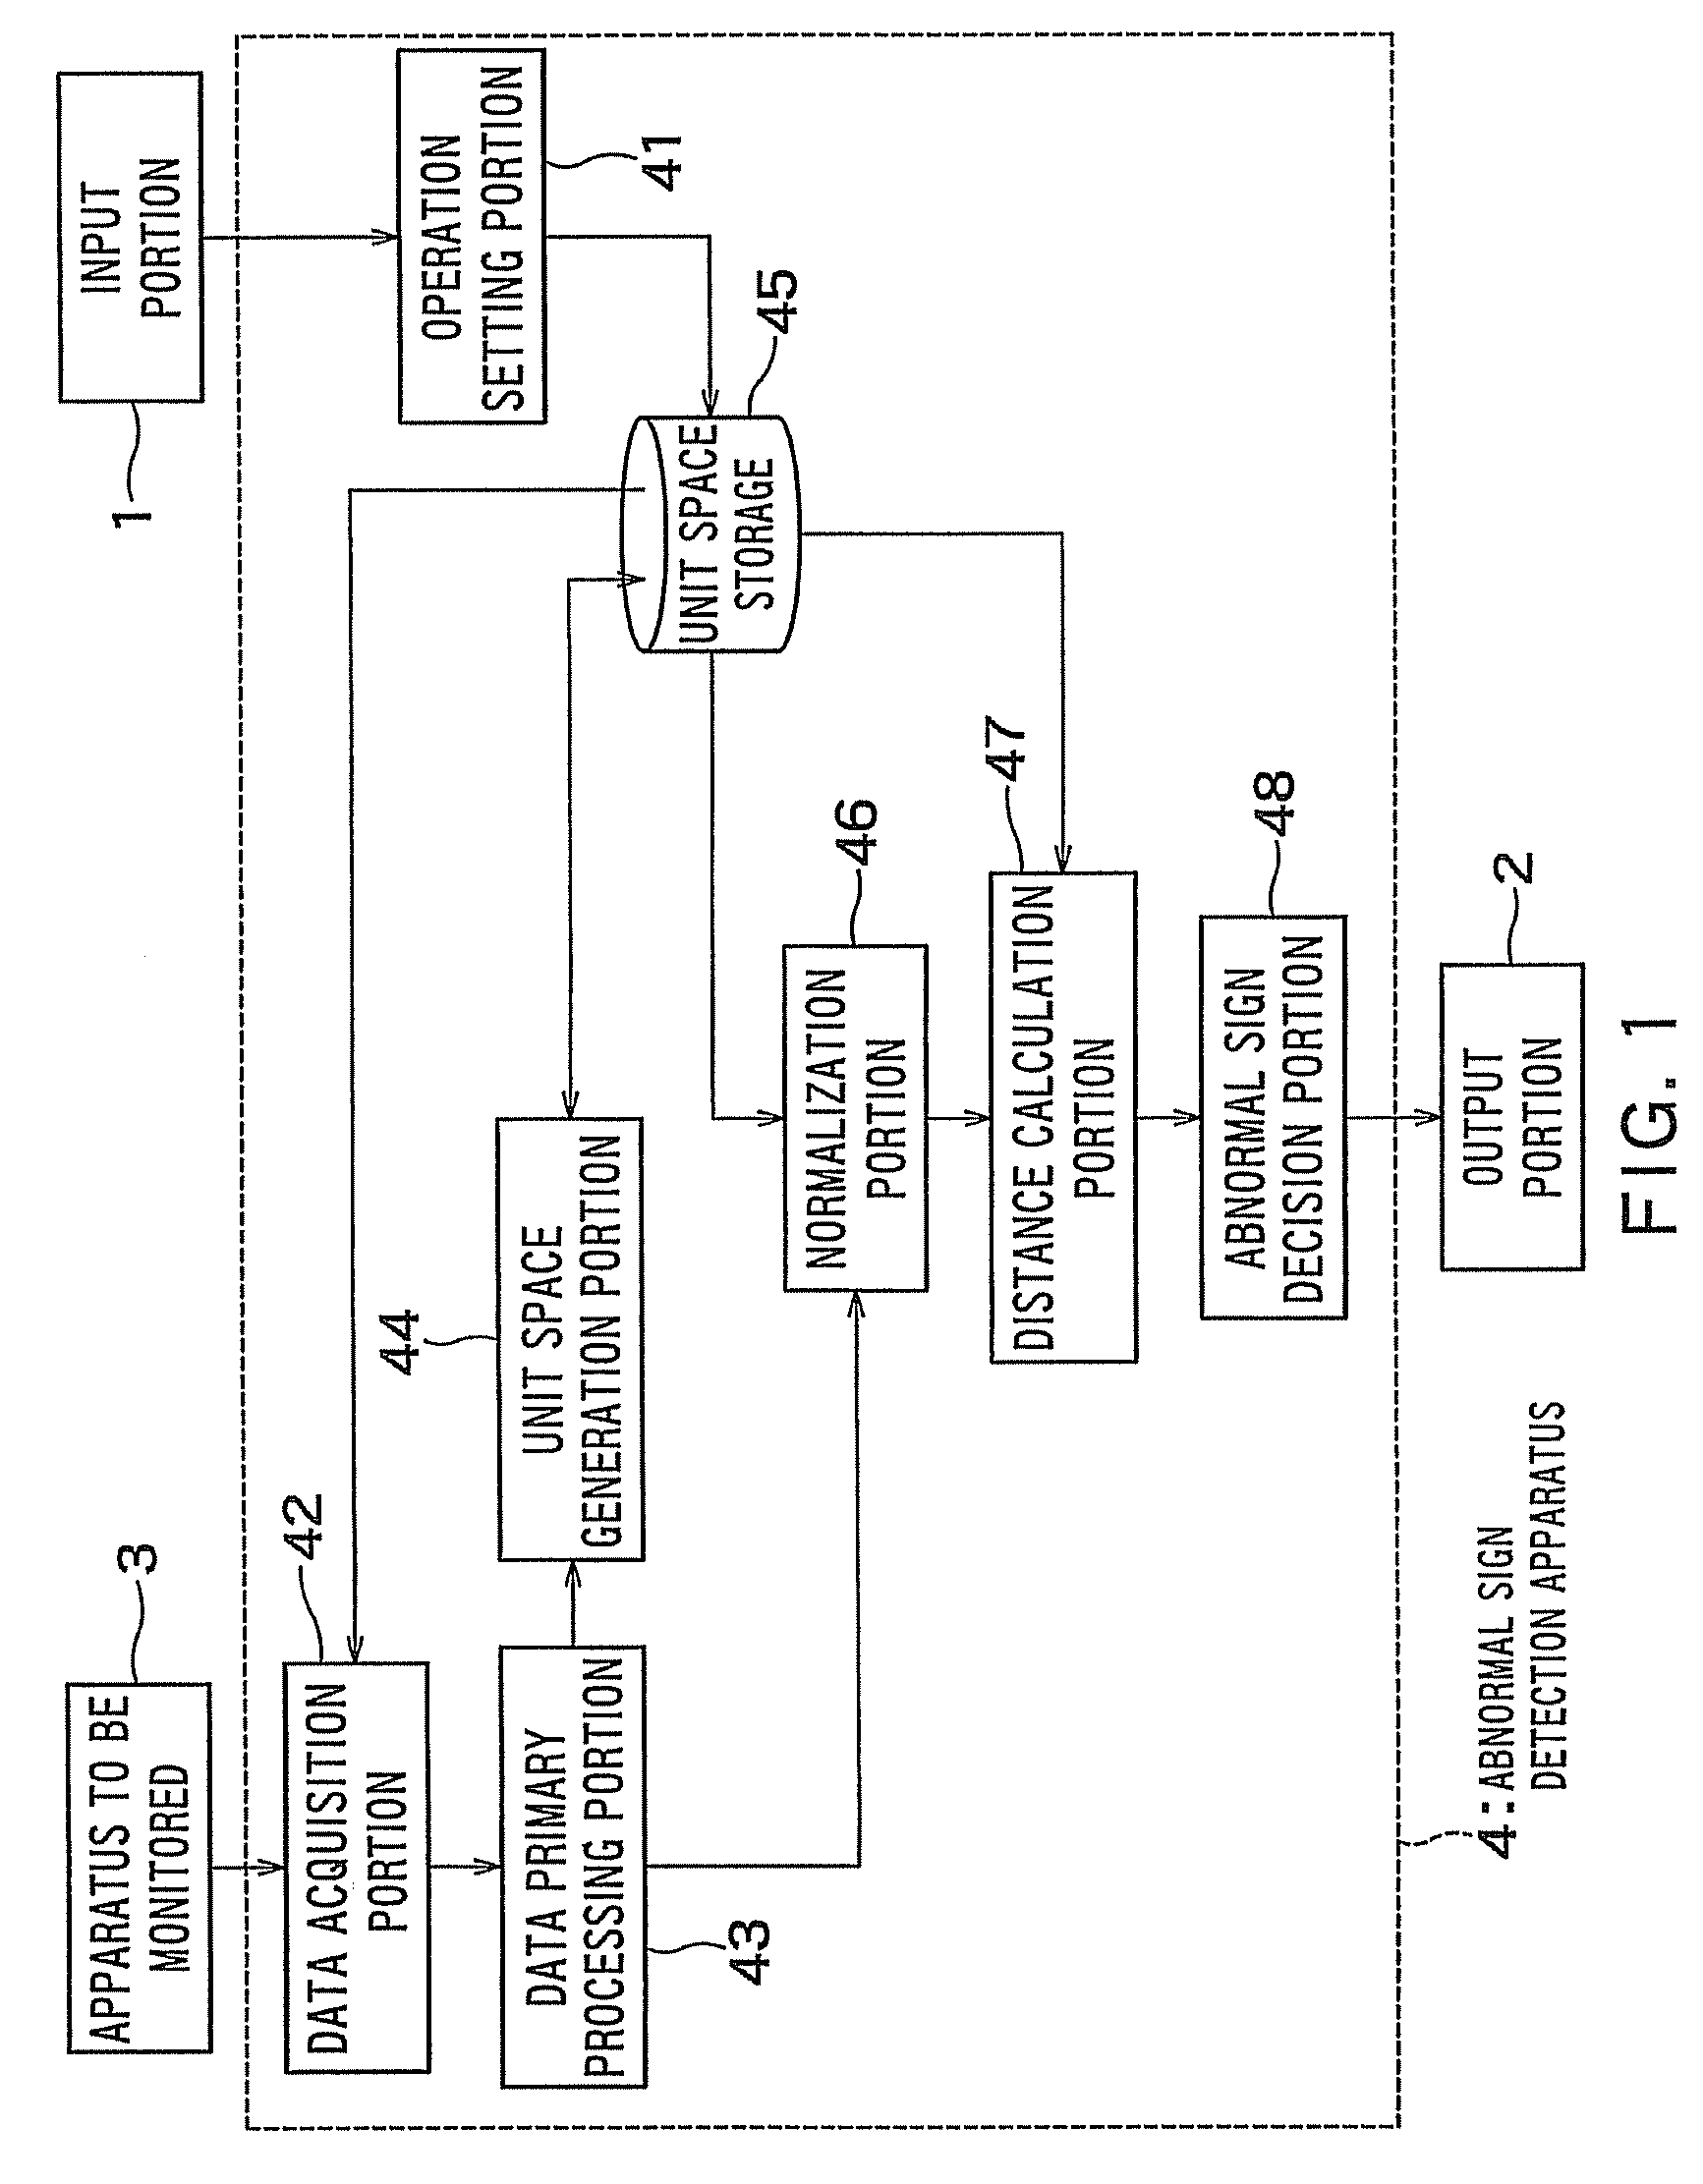 Apparatus and method for detecting abnormal sign